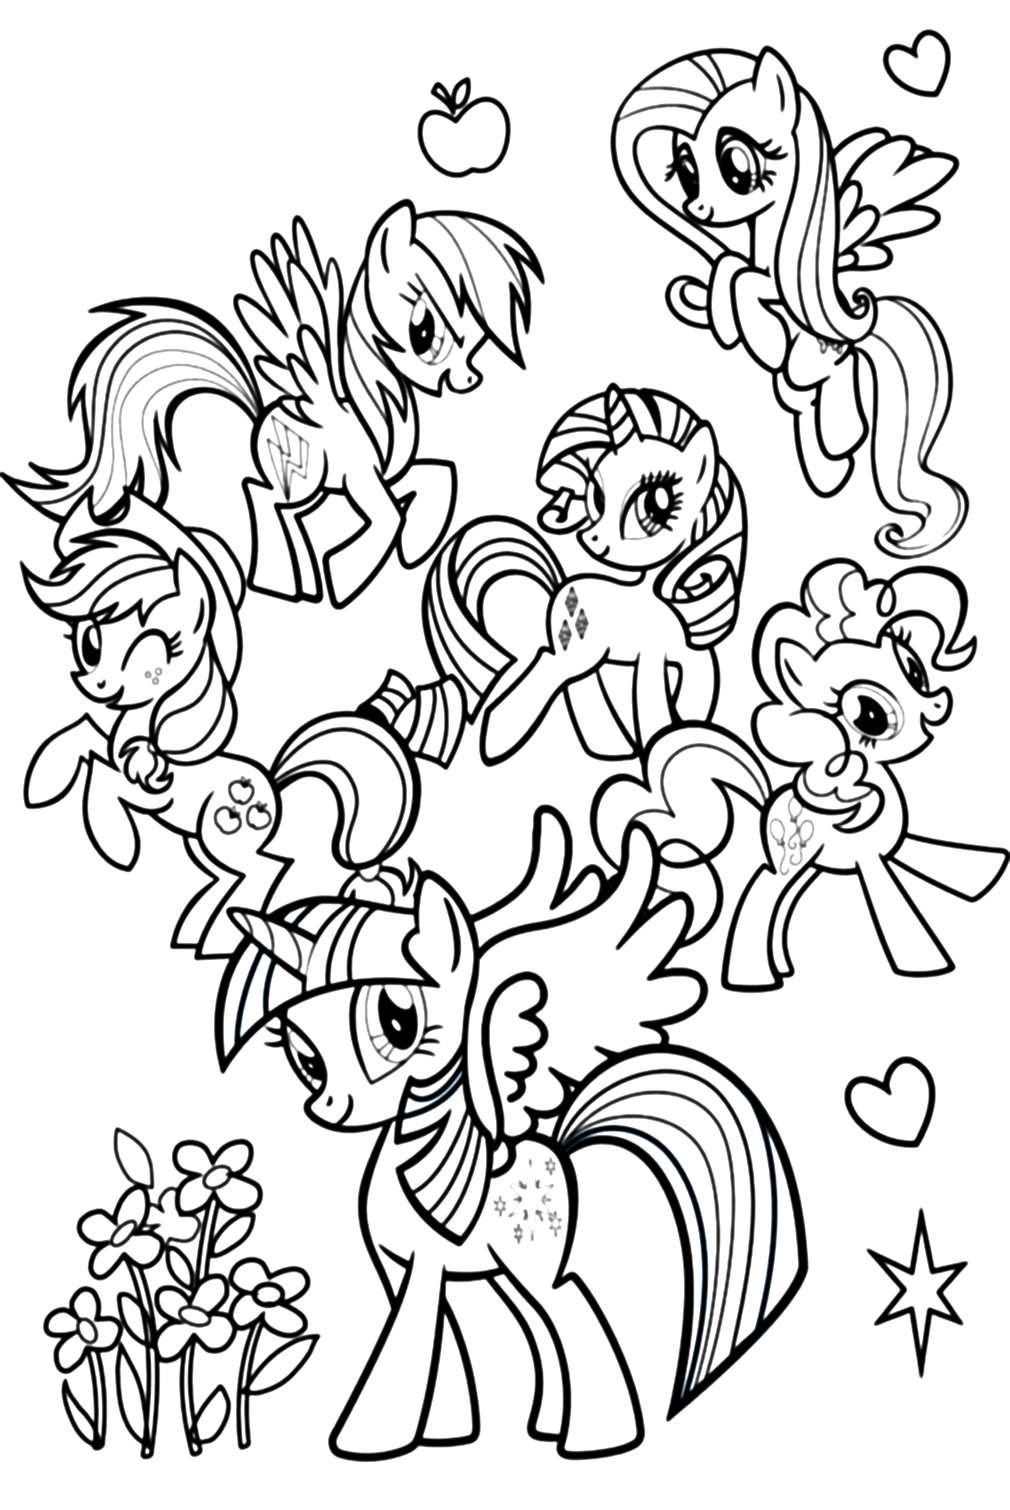 Applejack With Friends Coloring Page